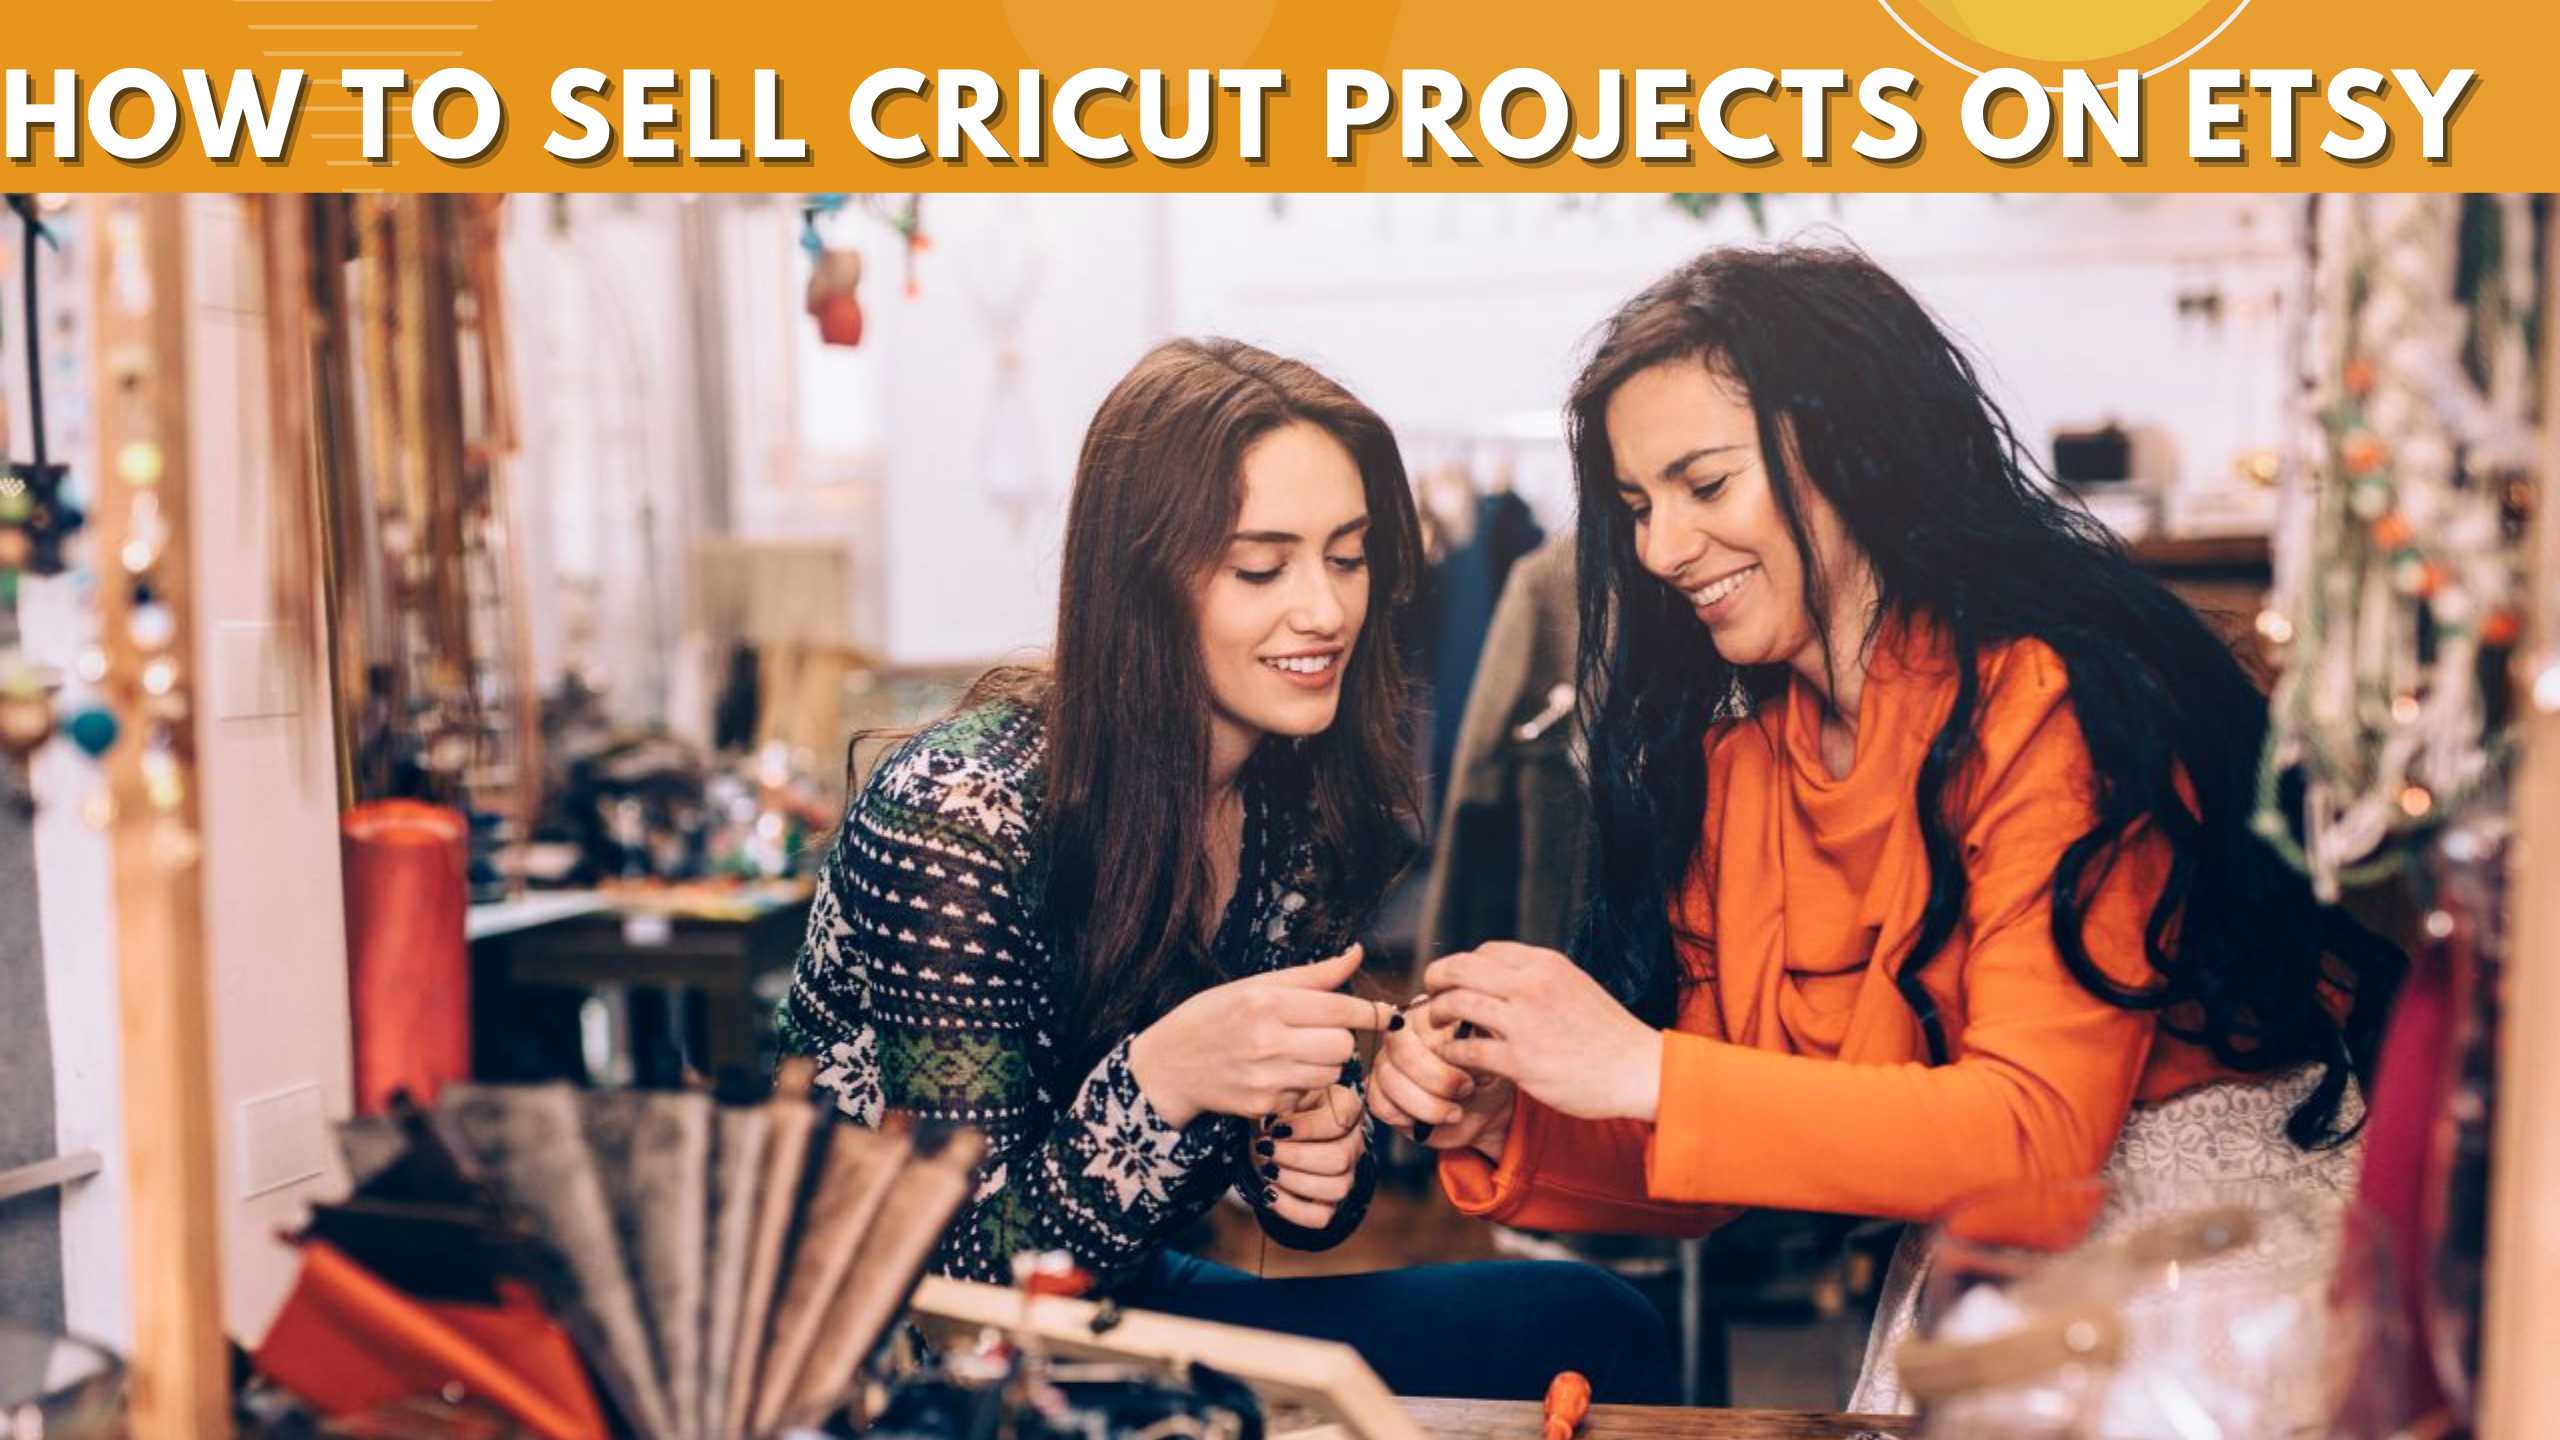 How to Sell Cricut Projects on Etsy